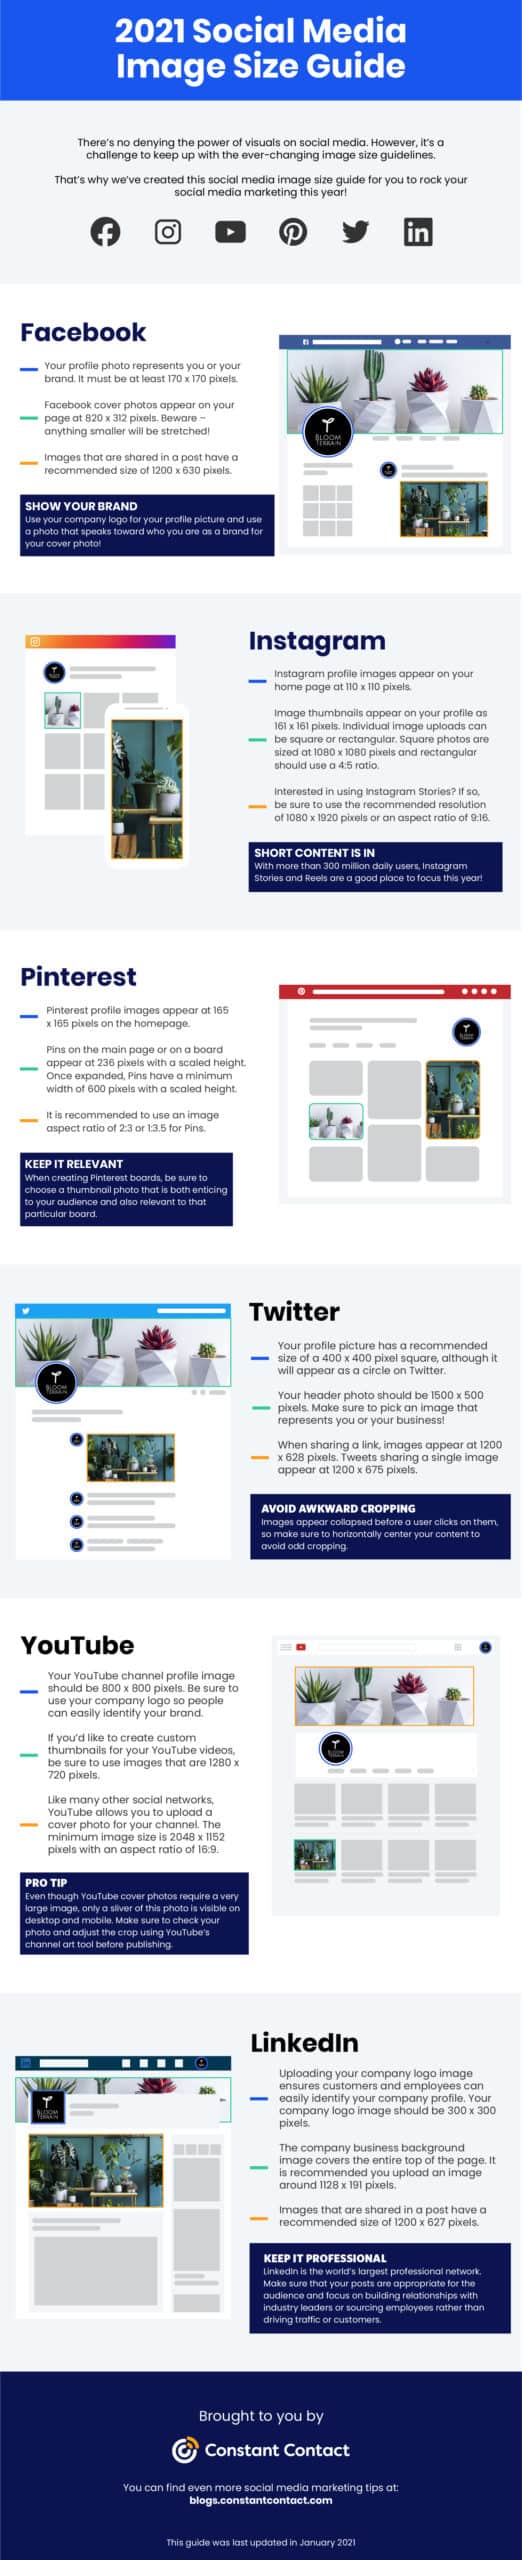 2021 Social Media Image Size Dimension Guide Infographic